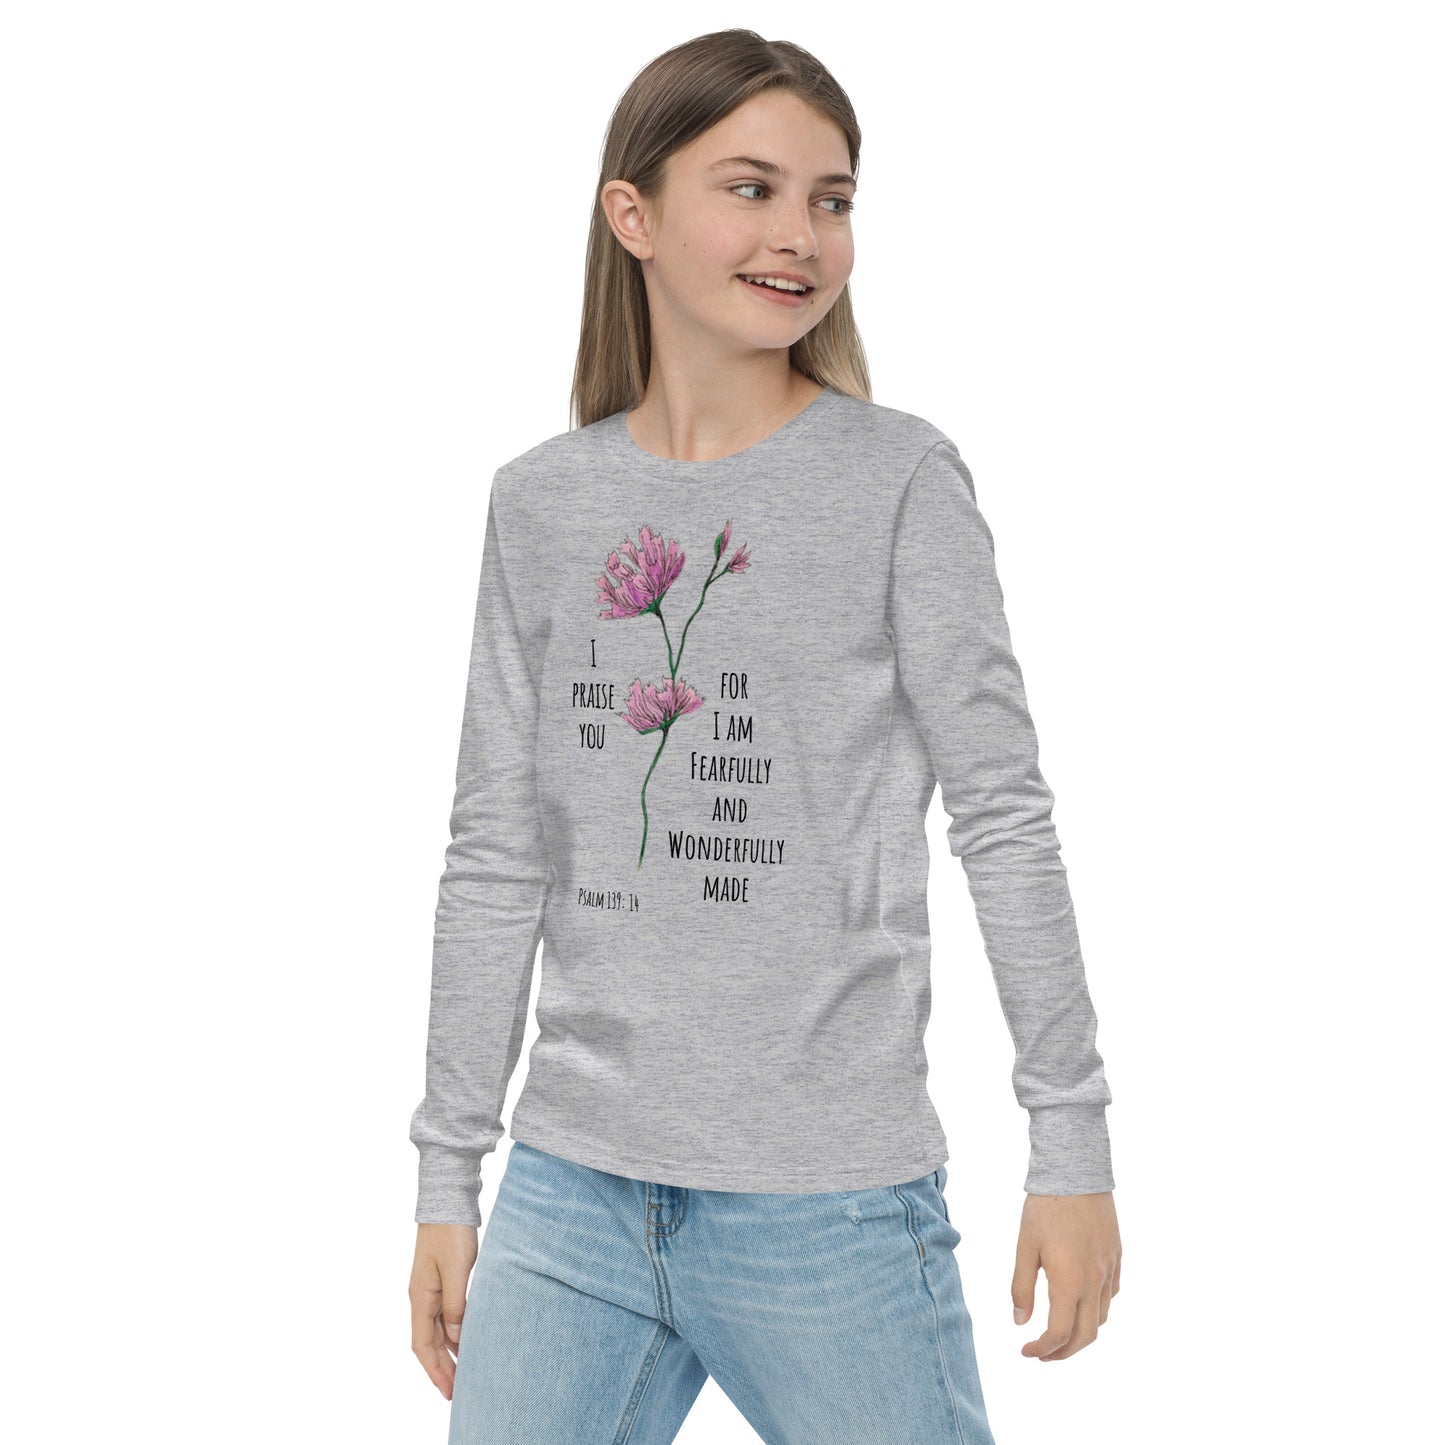 Fearfully and Wonderfully made- Youth long sleeve tee